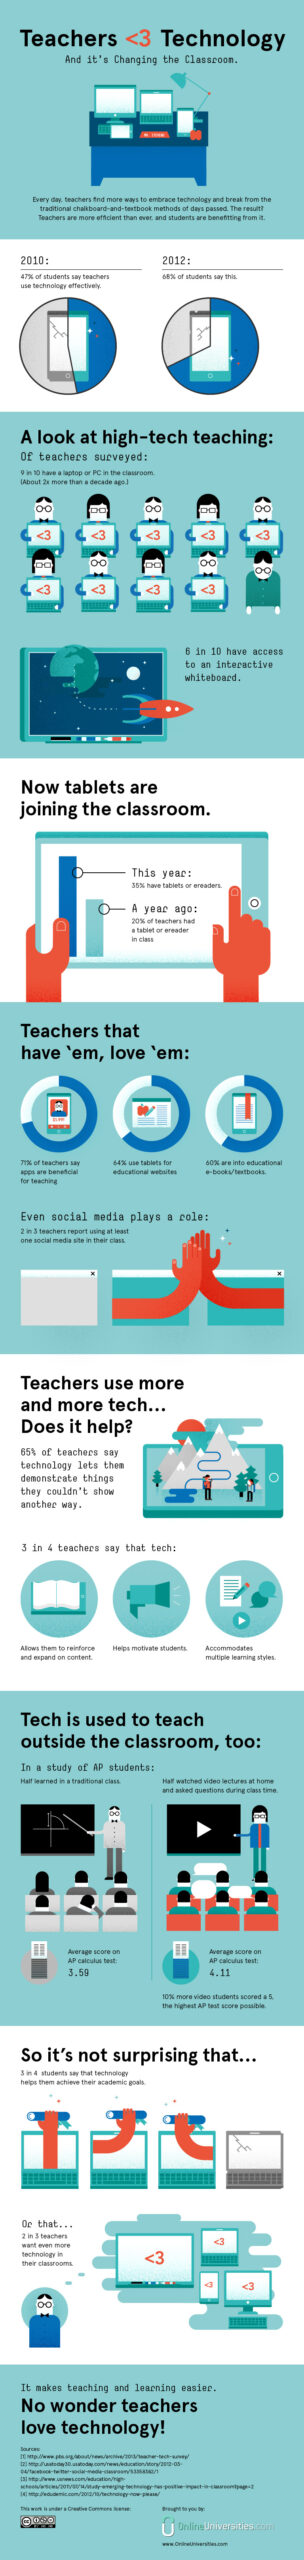 Teachers Turning to EdTech [INFOGRAPHIC]